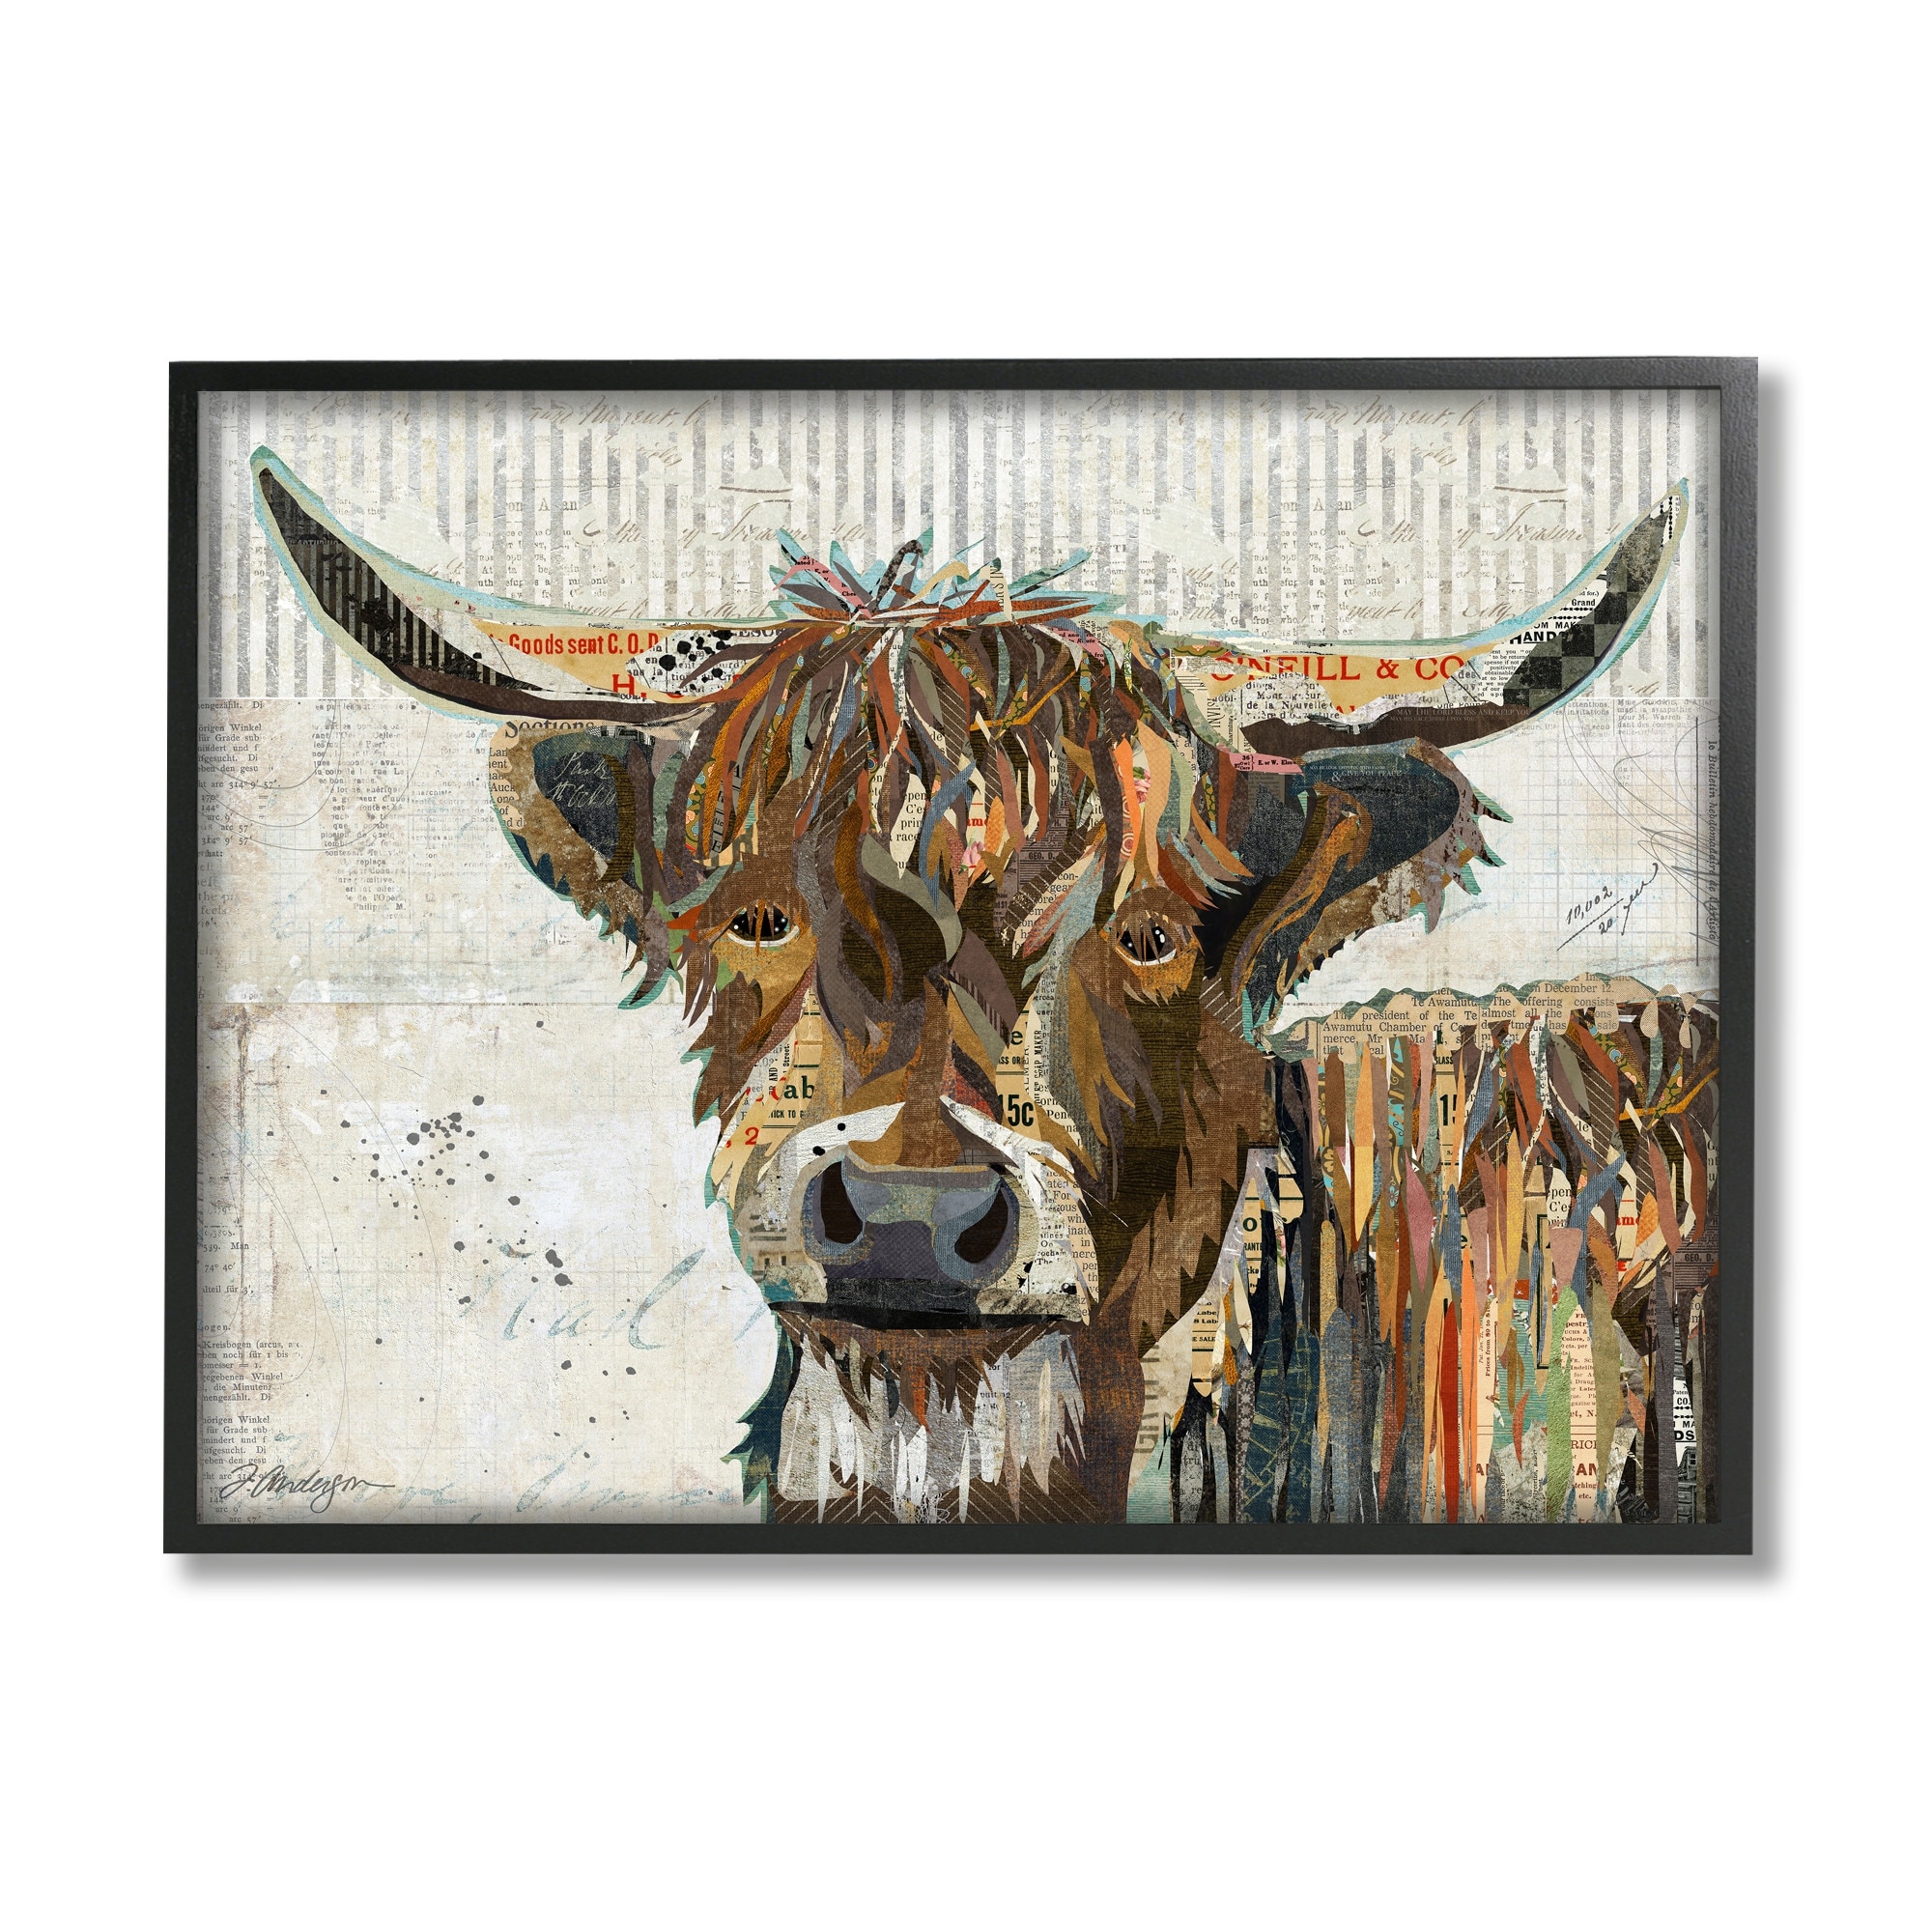 Stupell Highland Cattle Cow Collage Portrait Framed Giclee Texturized Wall  Art, Design By Traci Anderson Bed Bath  Beyond 36849015